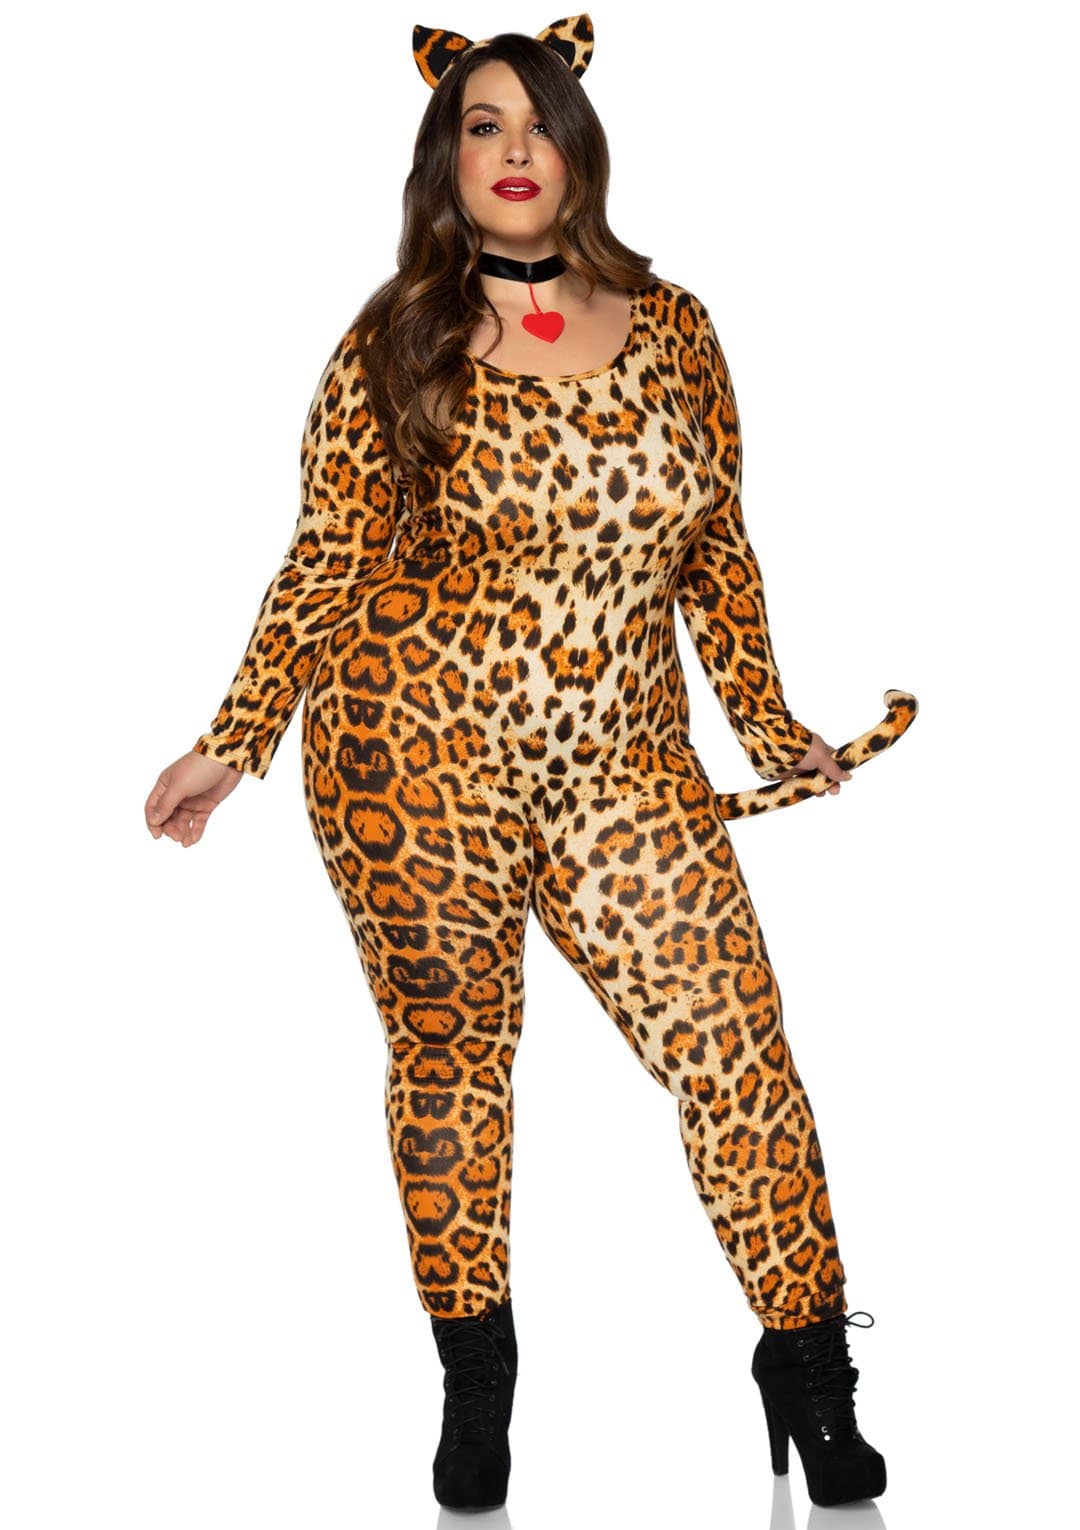 Cougar Spandex Plus Catsuit with Keyhole Back with Choke Collar and Ear Headband